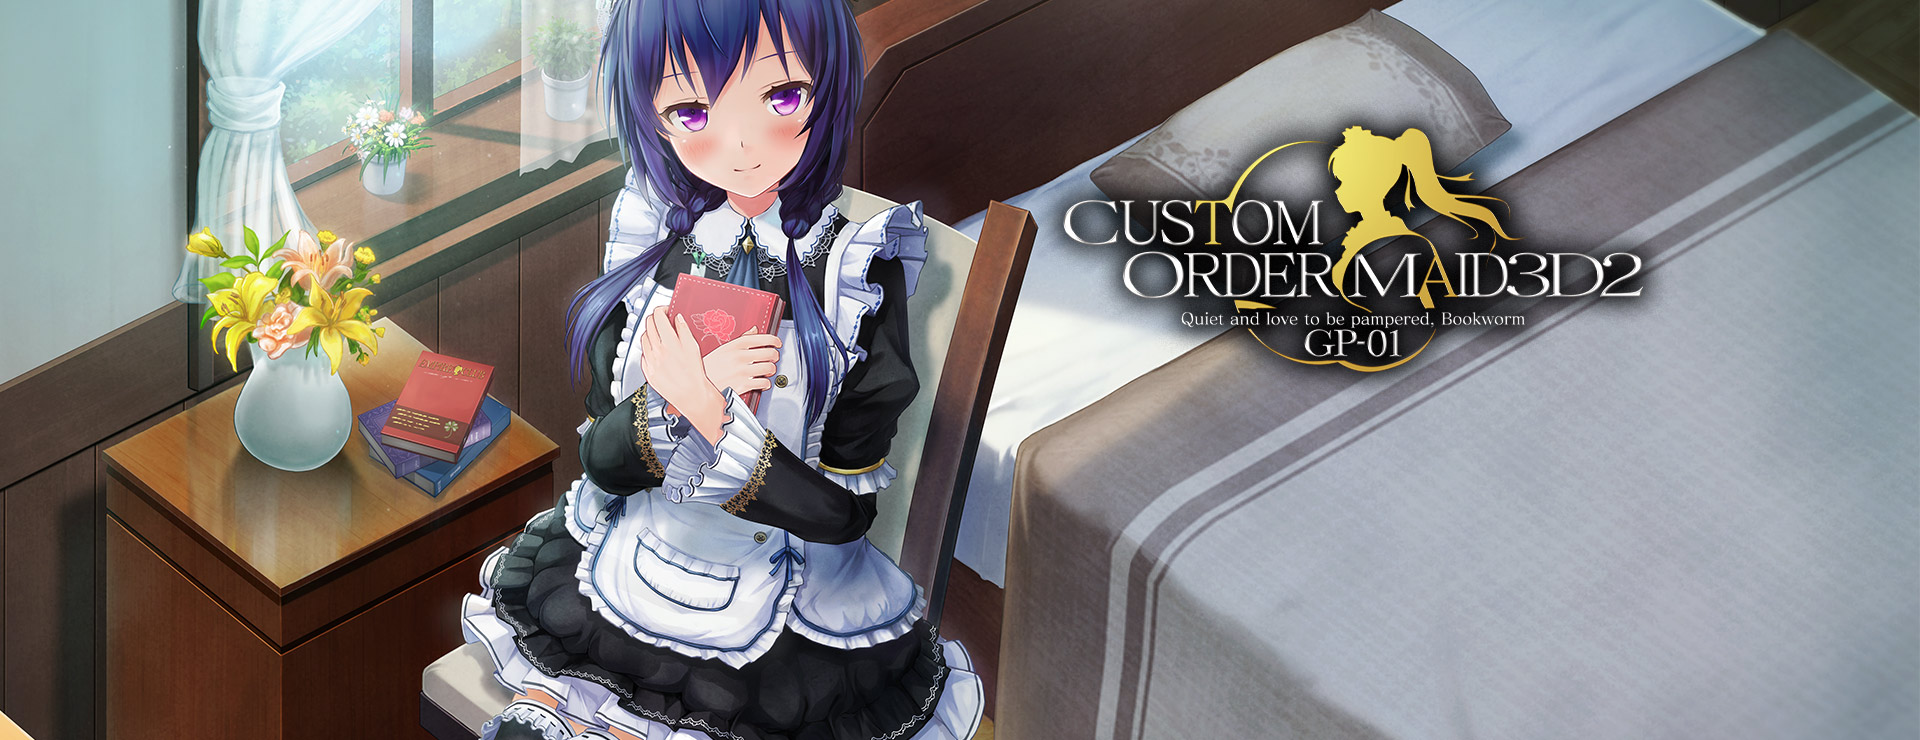 Custom Order Maid 3D2 - Quiet and love to be pampered Bookworm GP-01 DLC - シミュレーション ゲーム